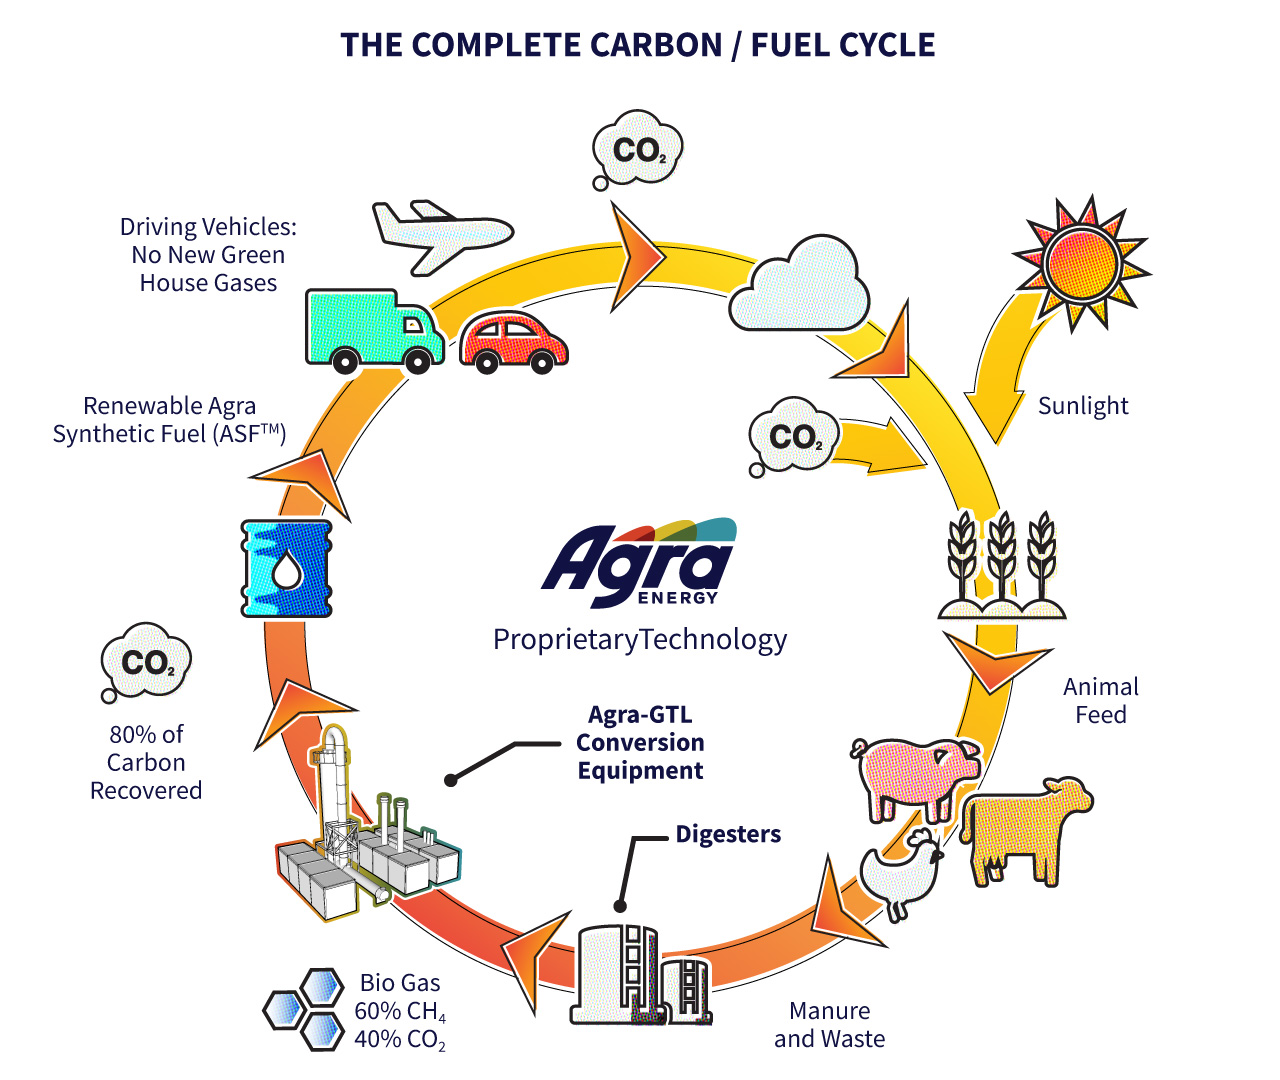 The Complete Carbon/Fuel Cycle